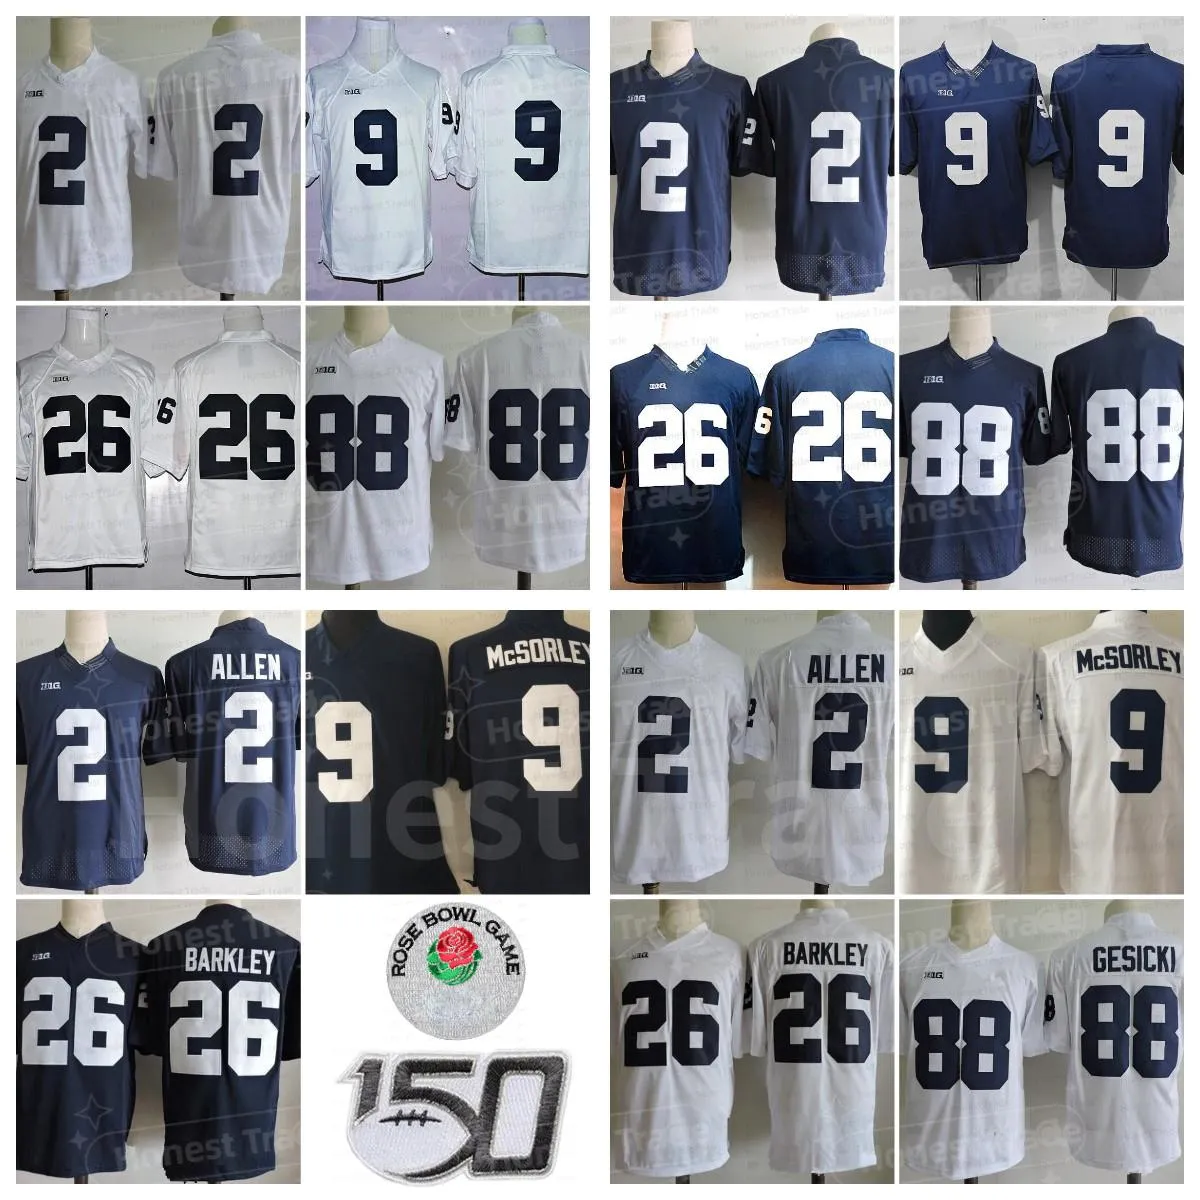 NCAA Penn State College Football #26 Saquon 9 Trace McSorley 88 Mike Gesicki 2 Marcus Allen Paterno Stitched Jerseys White Navy 150th Men Uniformen